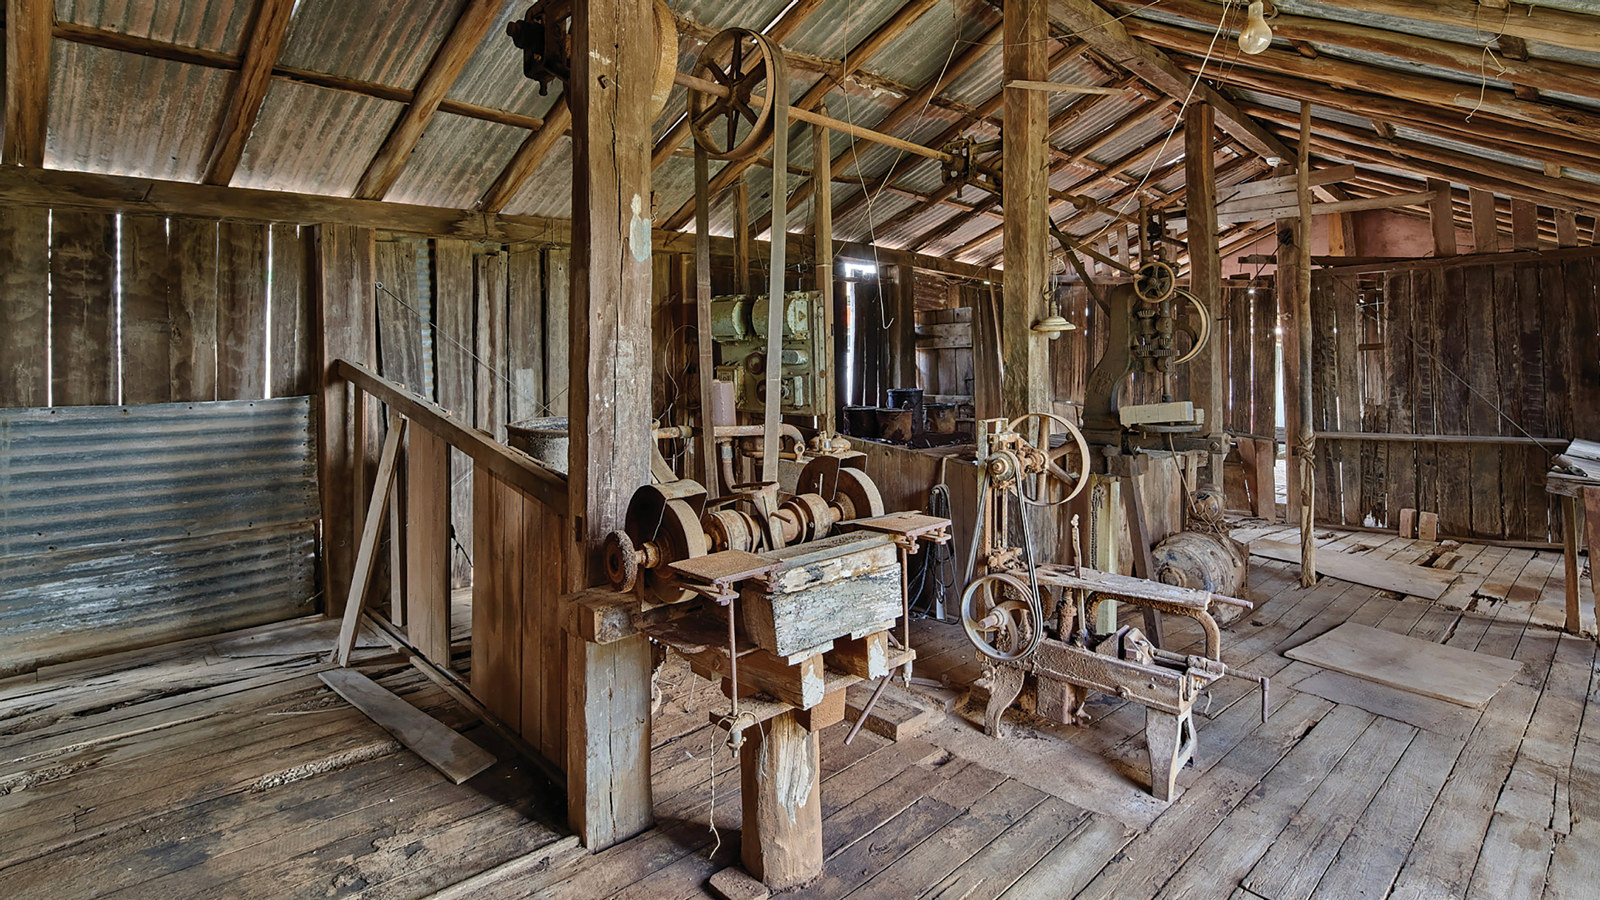 Internal view of the timber shed at Rouse Hill Estate